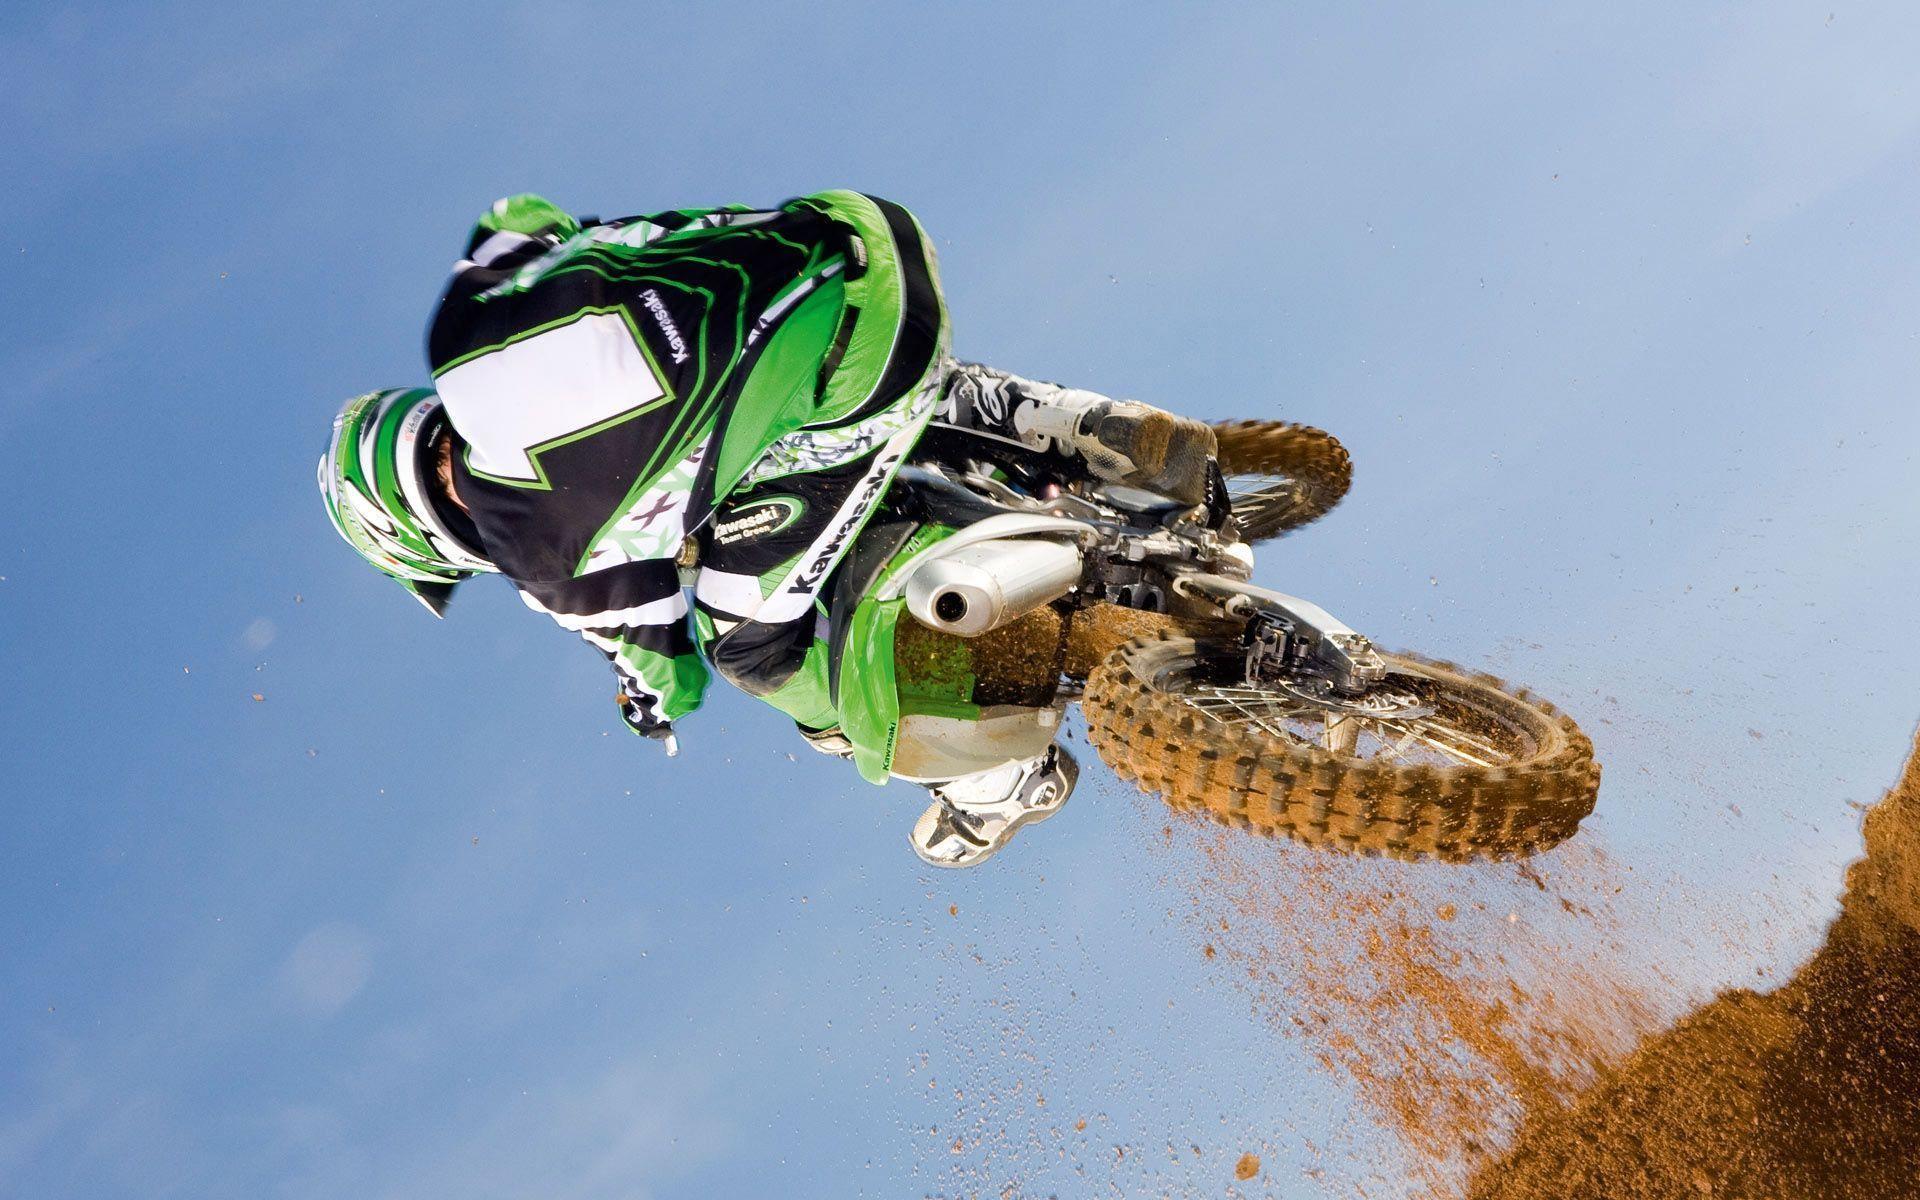 Motocross Photo Collections 23167 High Resolution. HD Wallpaper